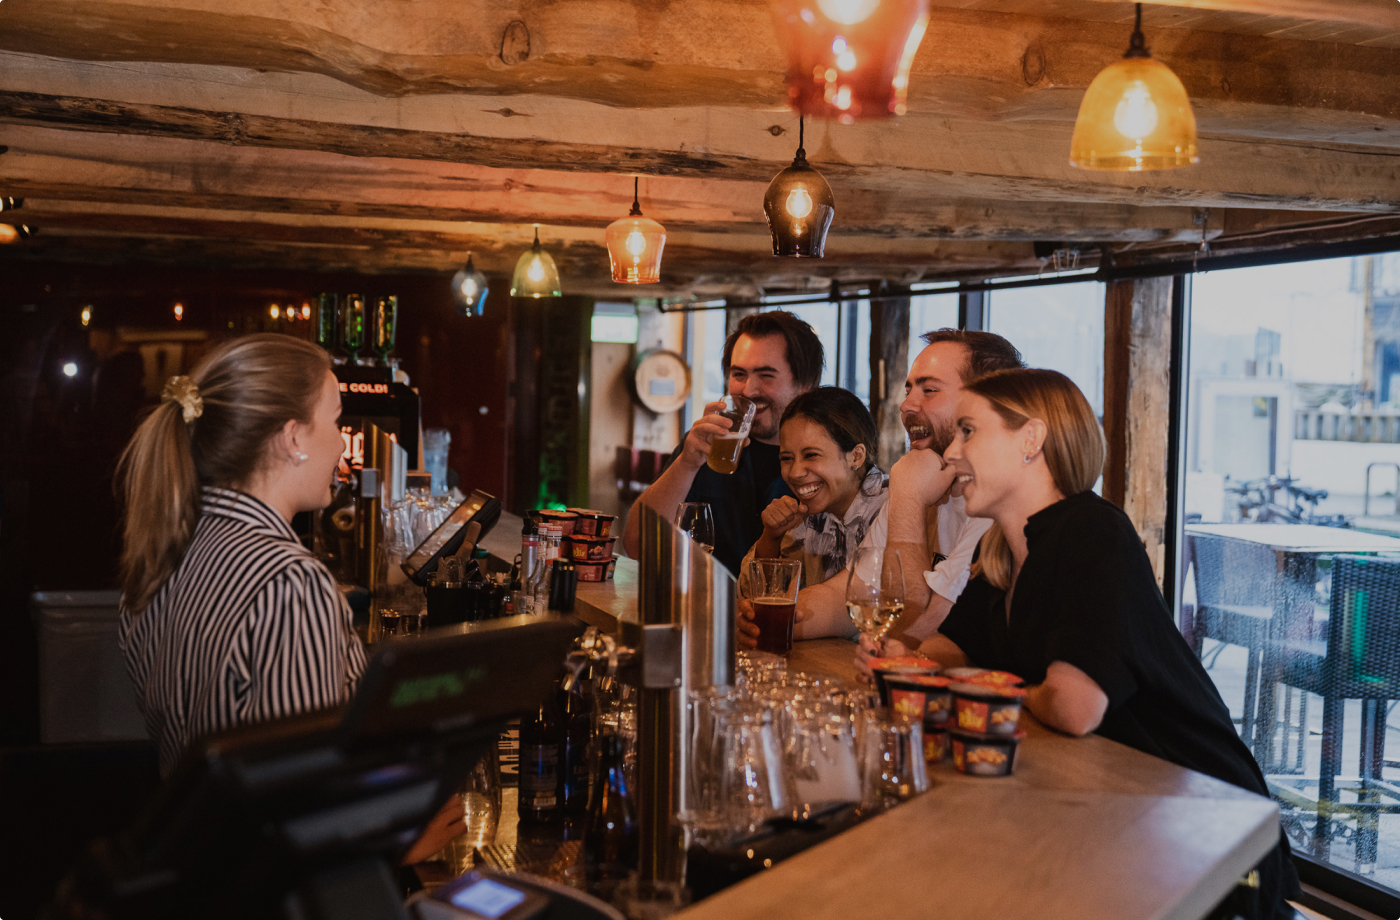 Business Insurance for Your Pub